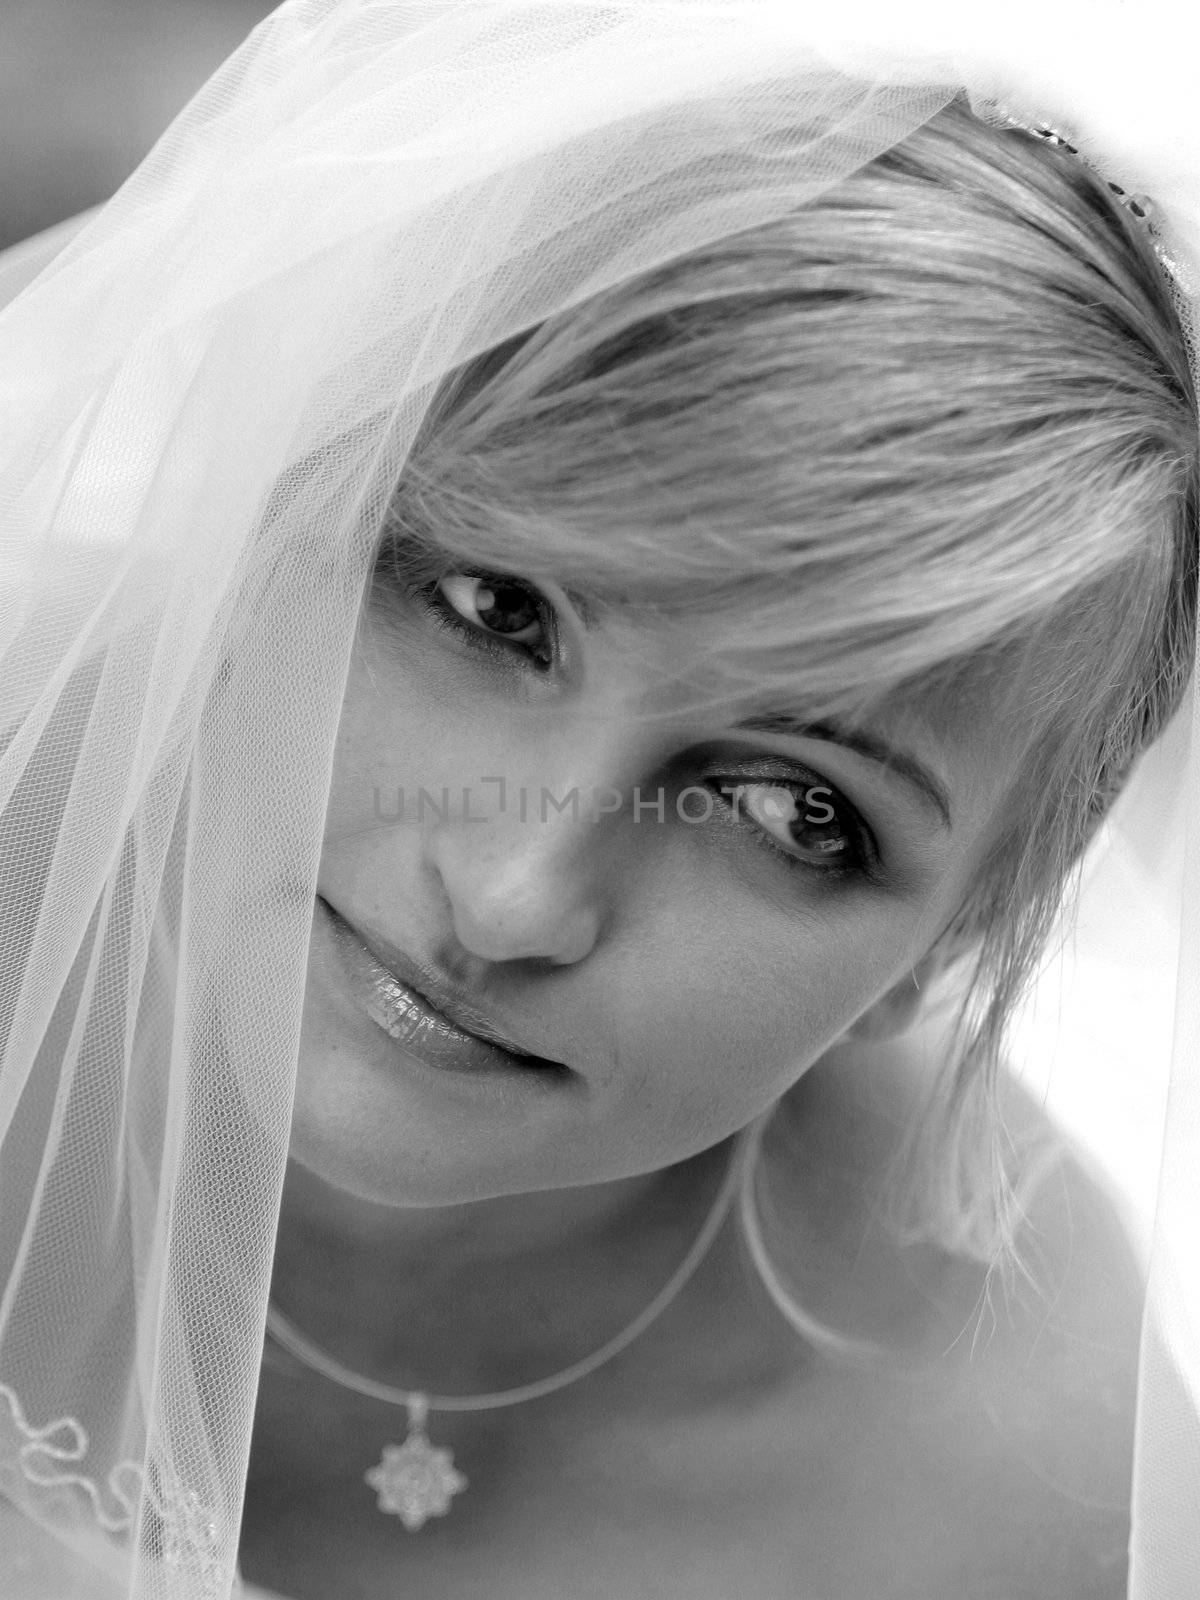 Portrait of beautiful bride in traditional wedding dress and veil.